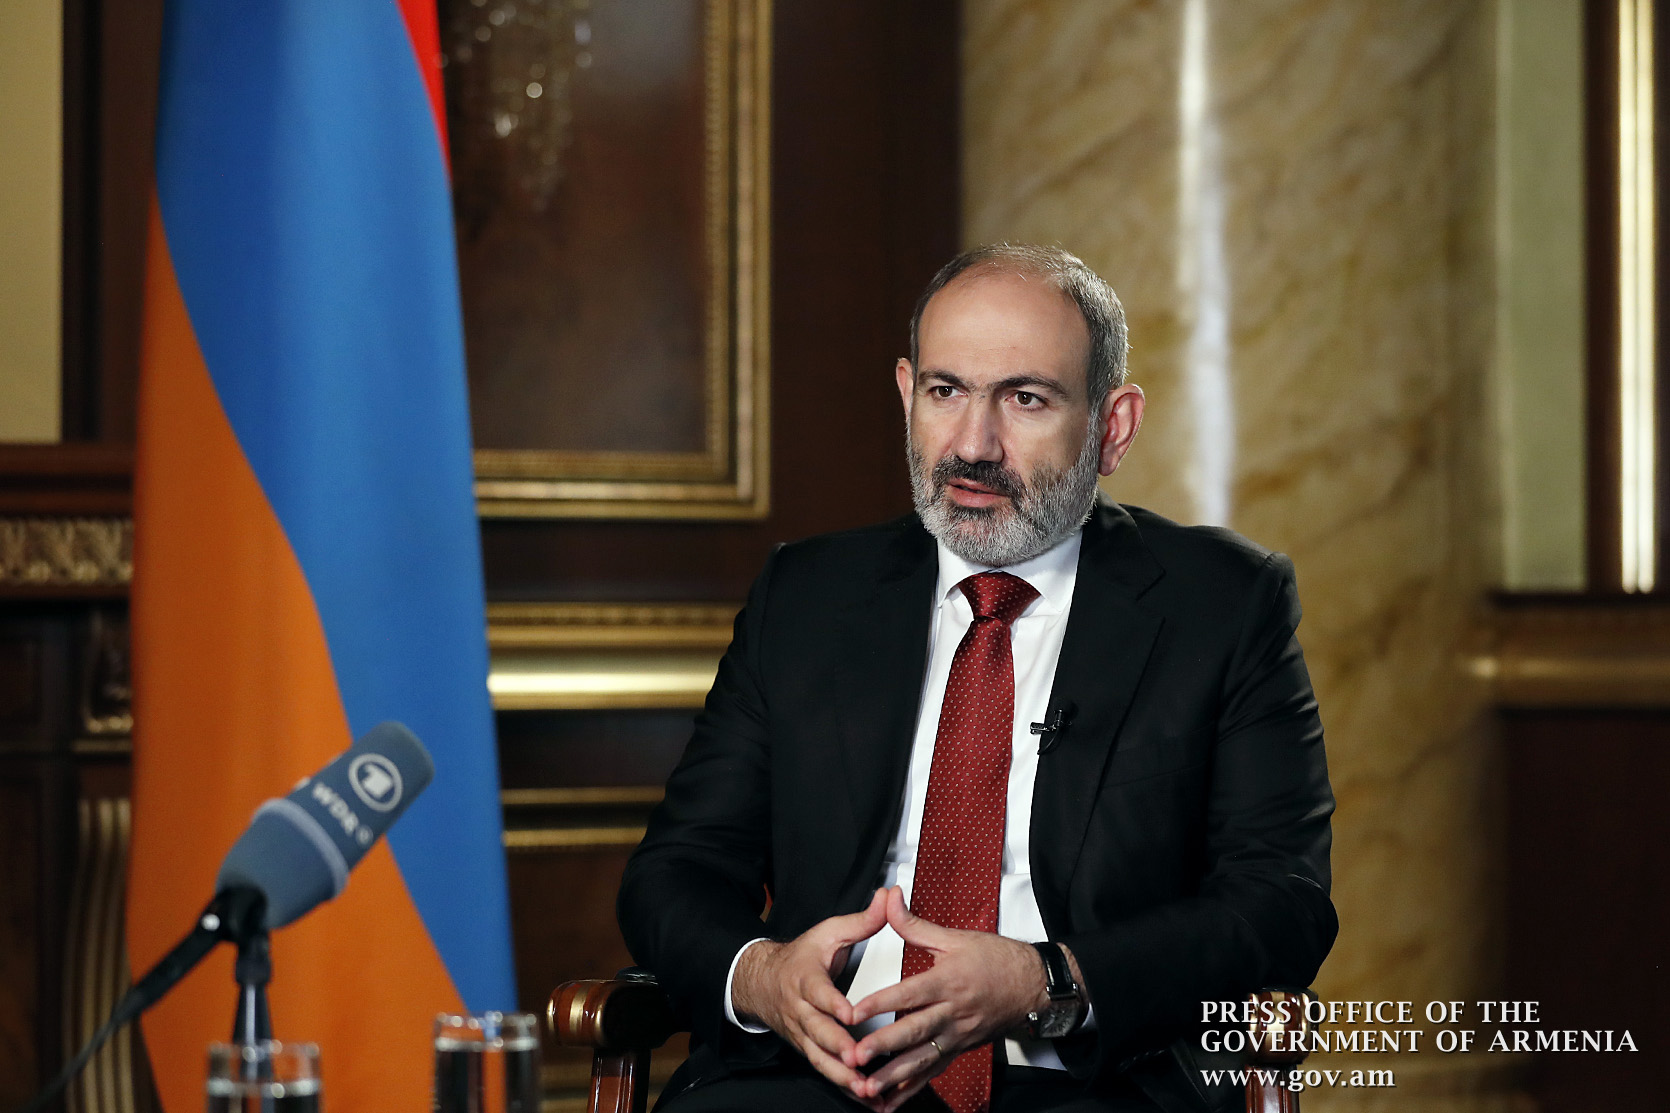 “World War III is on its way in the form of hybrid warfare” – Nikol Pashinyan’s interview to German ARD TV channel